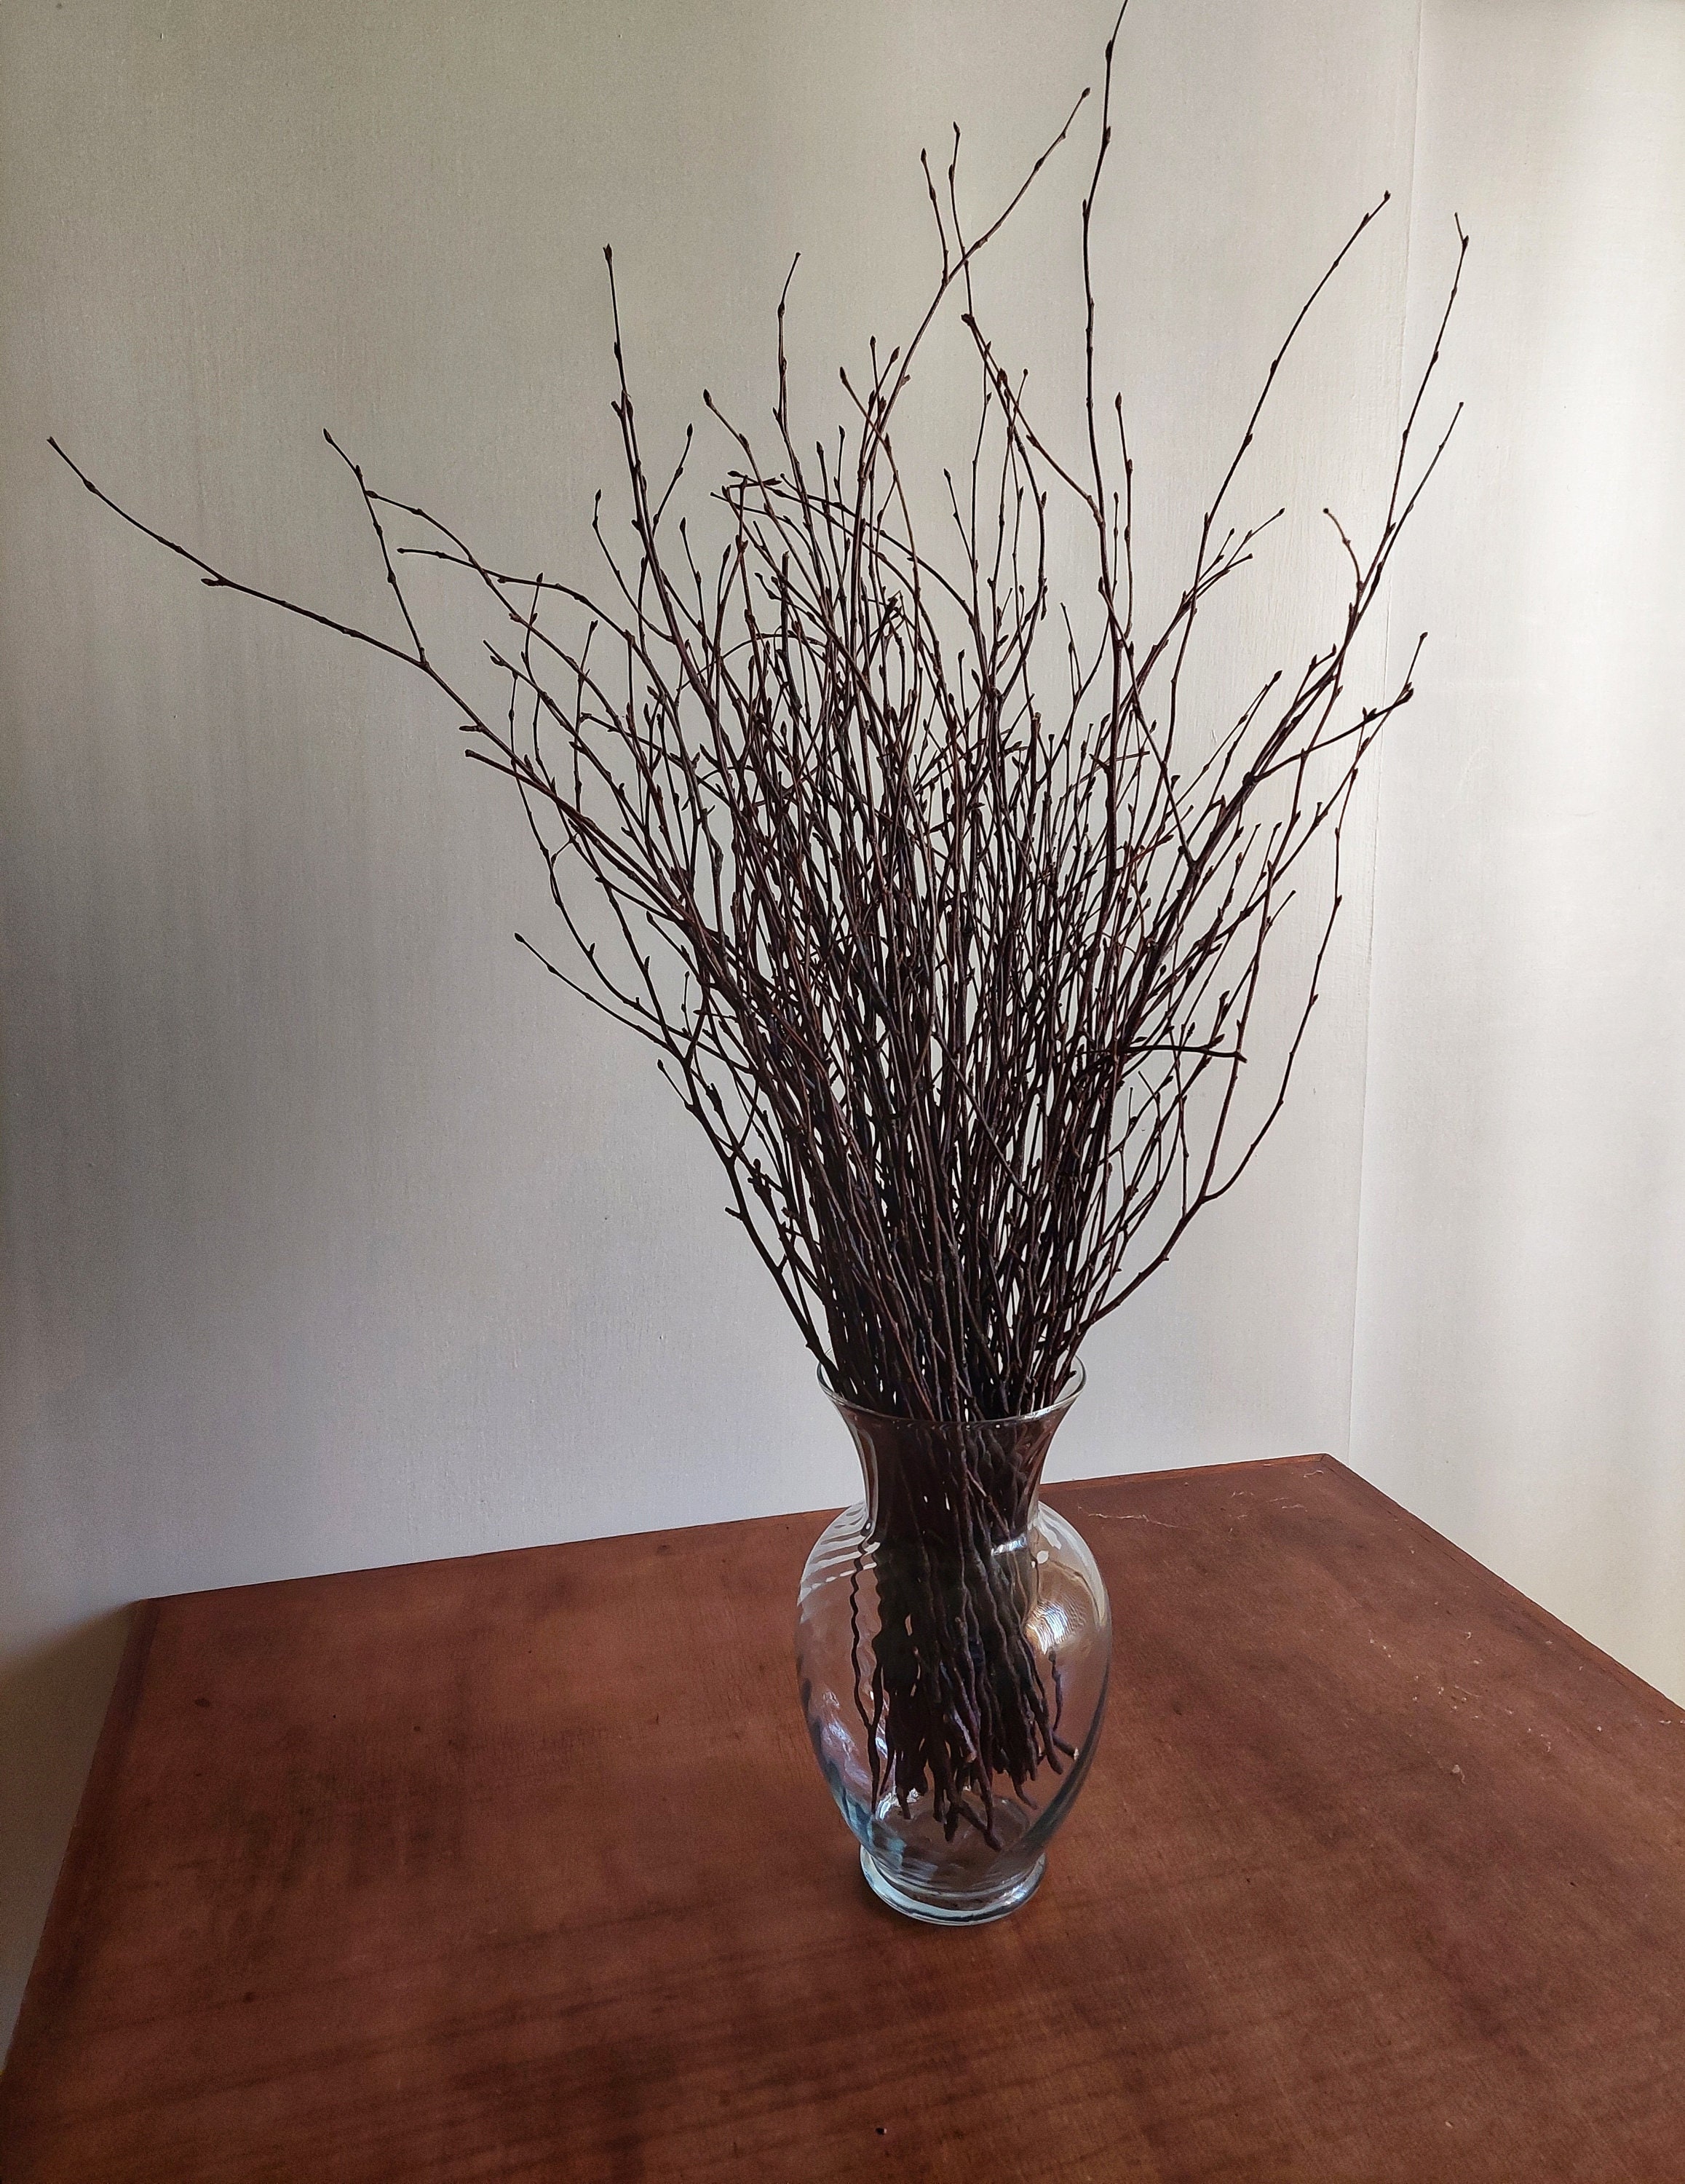 50 pcs Birch Branches for Vases, Decoration for Sale. Natural Birch Twigs  for centerpieces. Floral Stick.